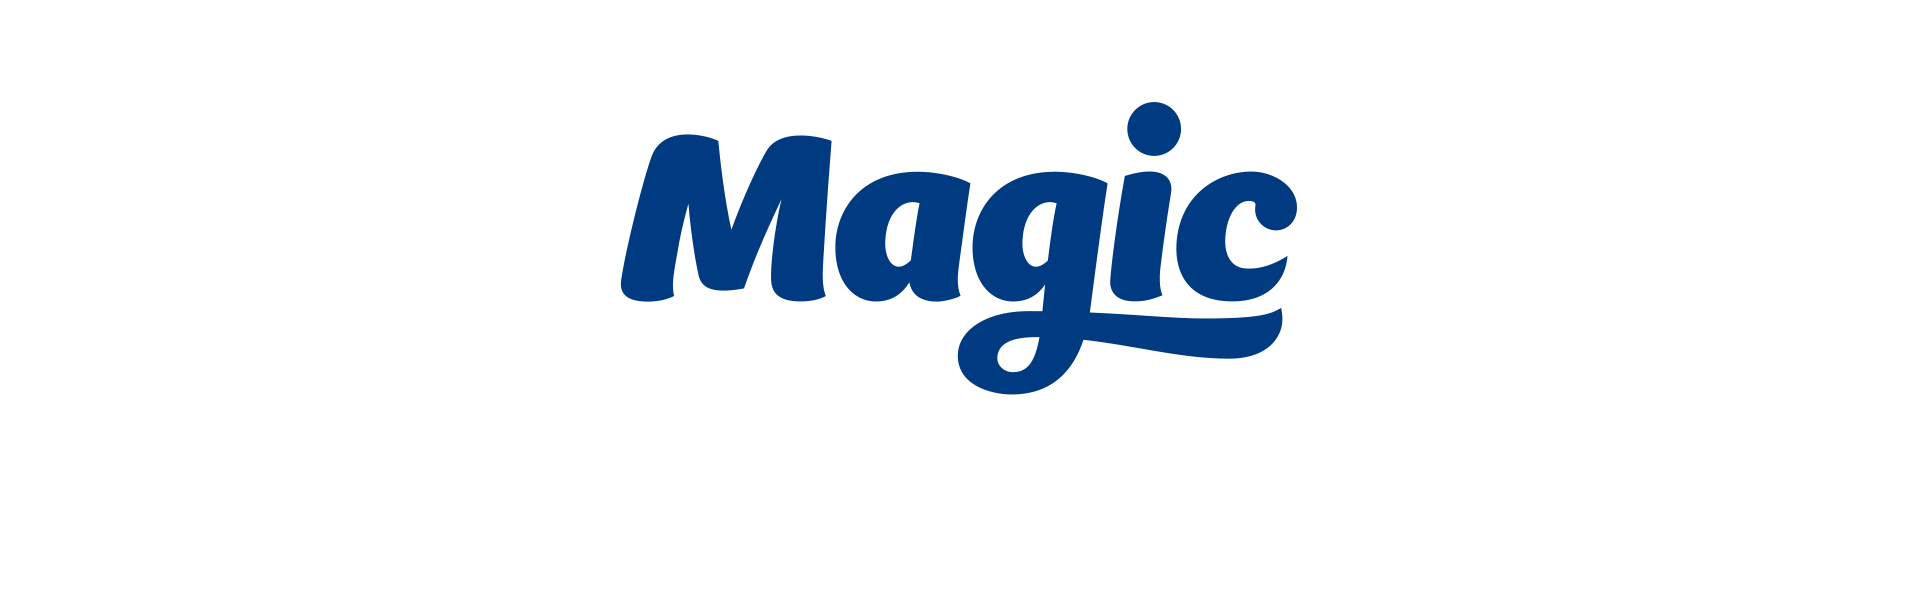 Number call magic radio you does on? what Terms, Conditions